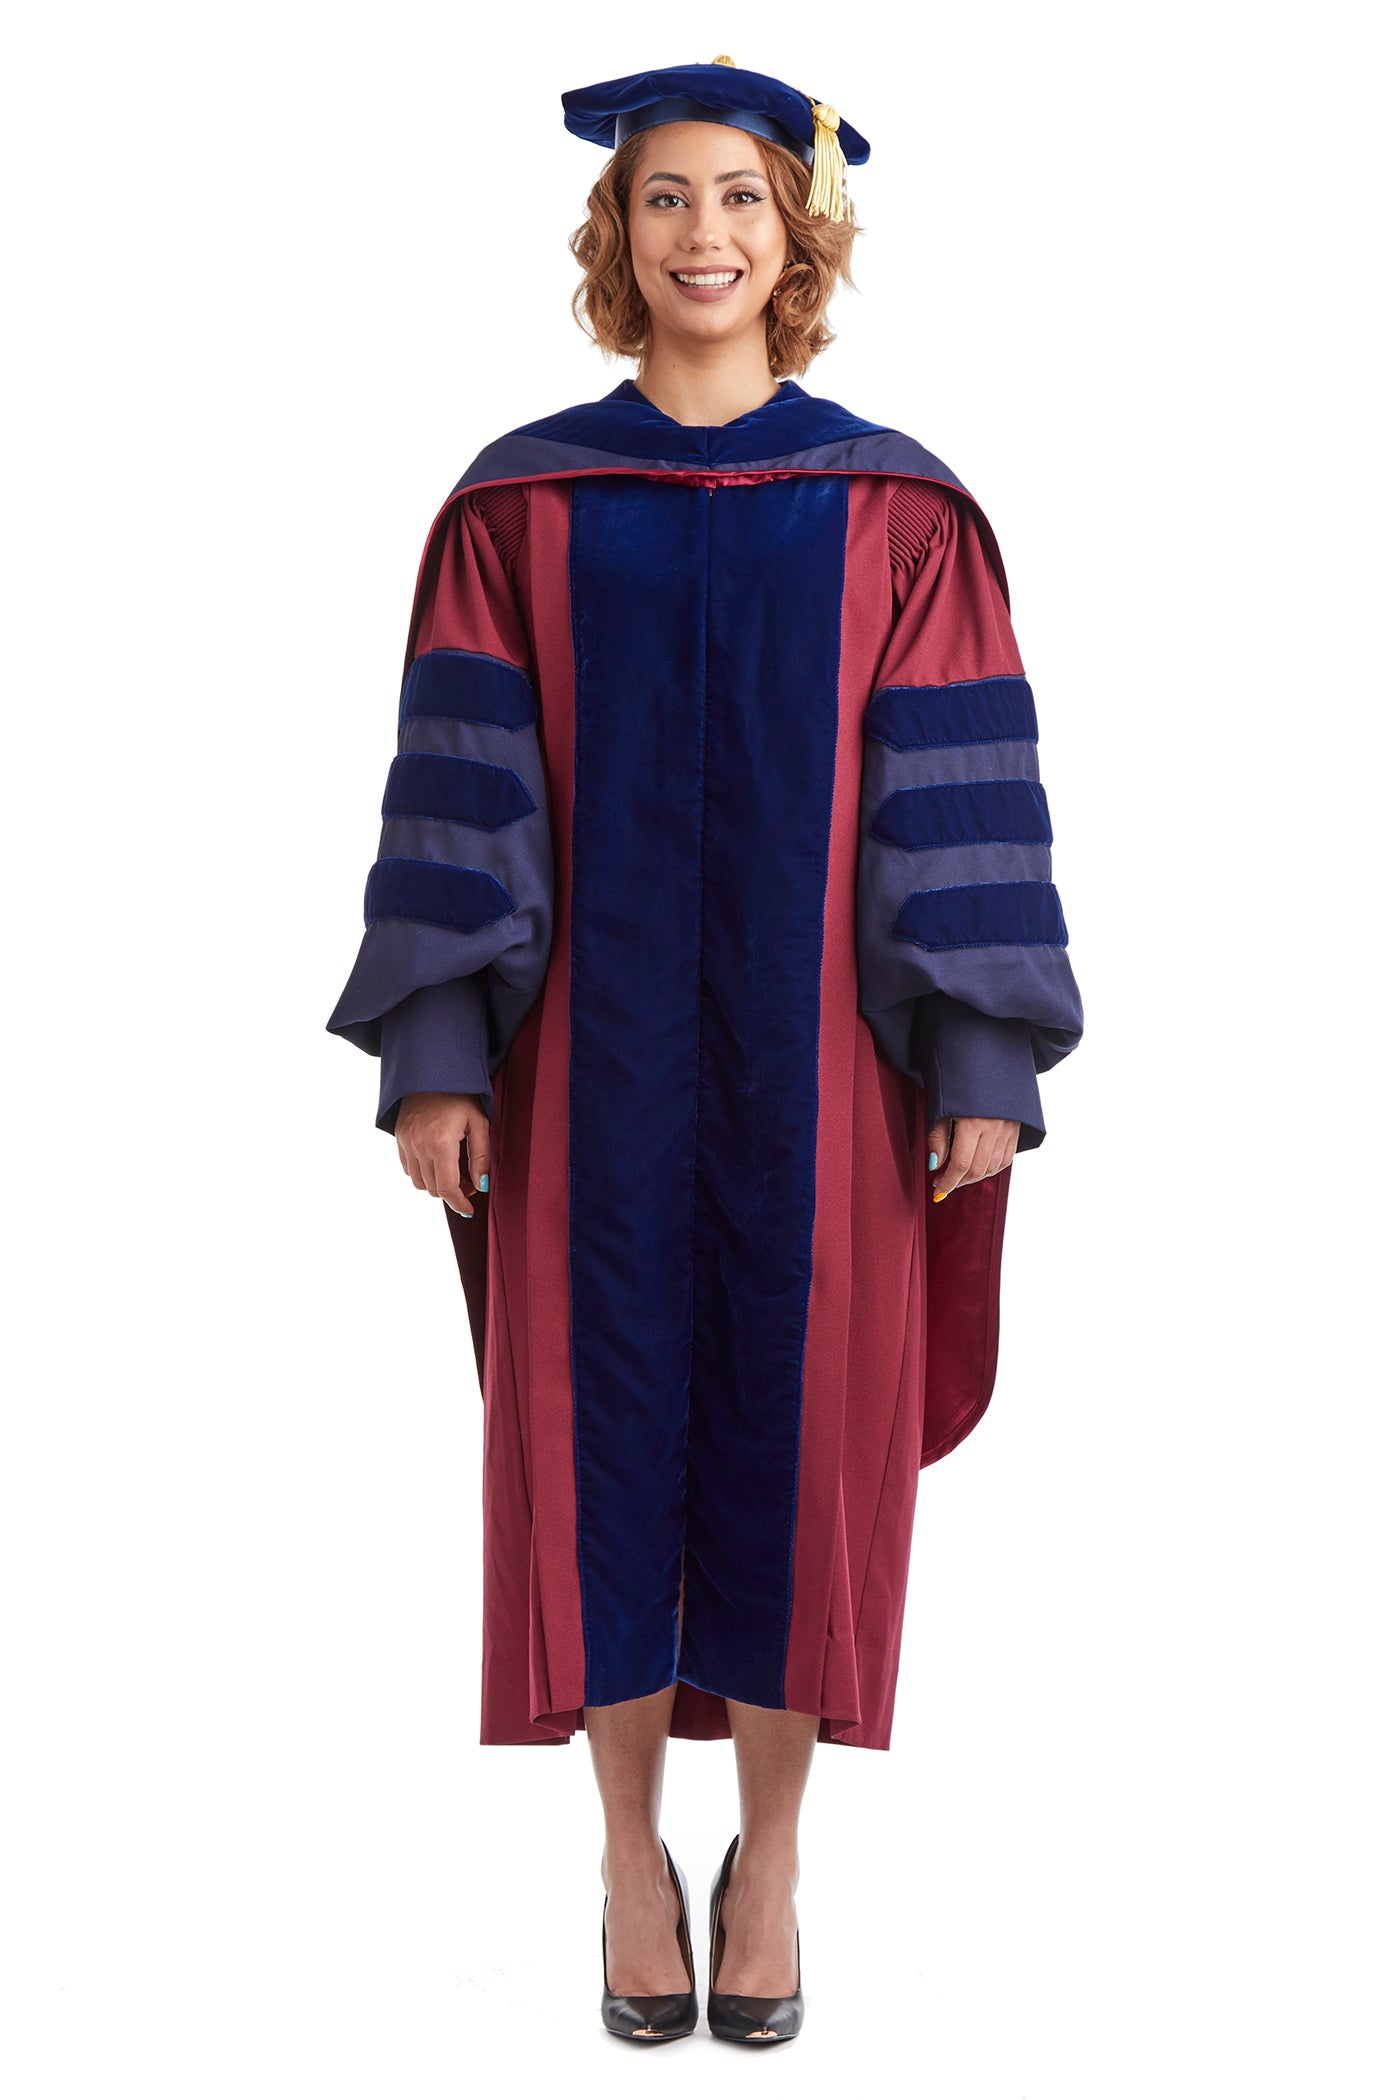 Deluxe Royal Blue Doctoral Gown – Academic Hoods